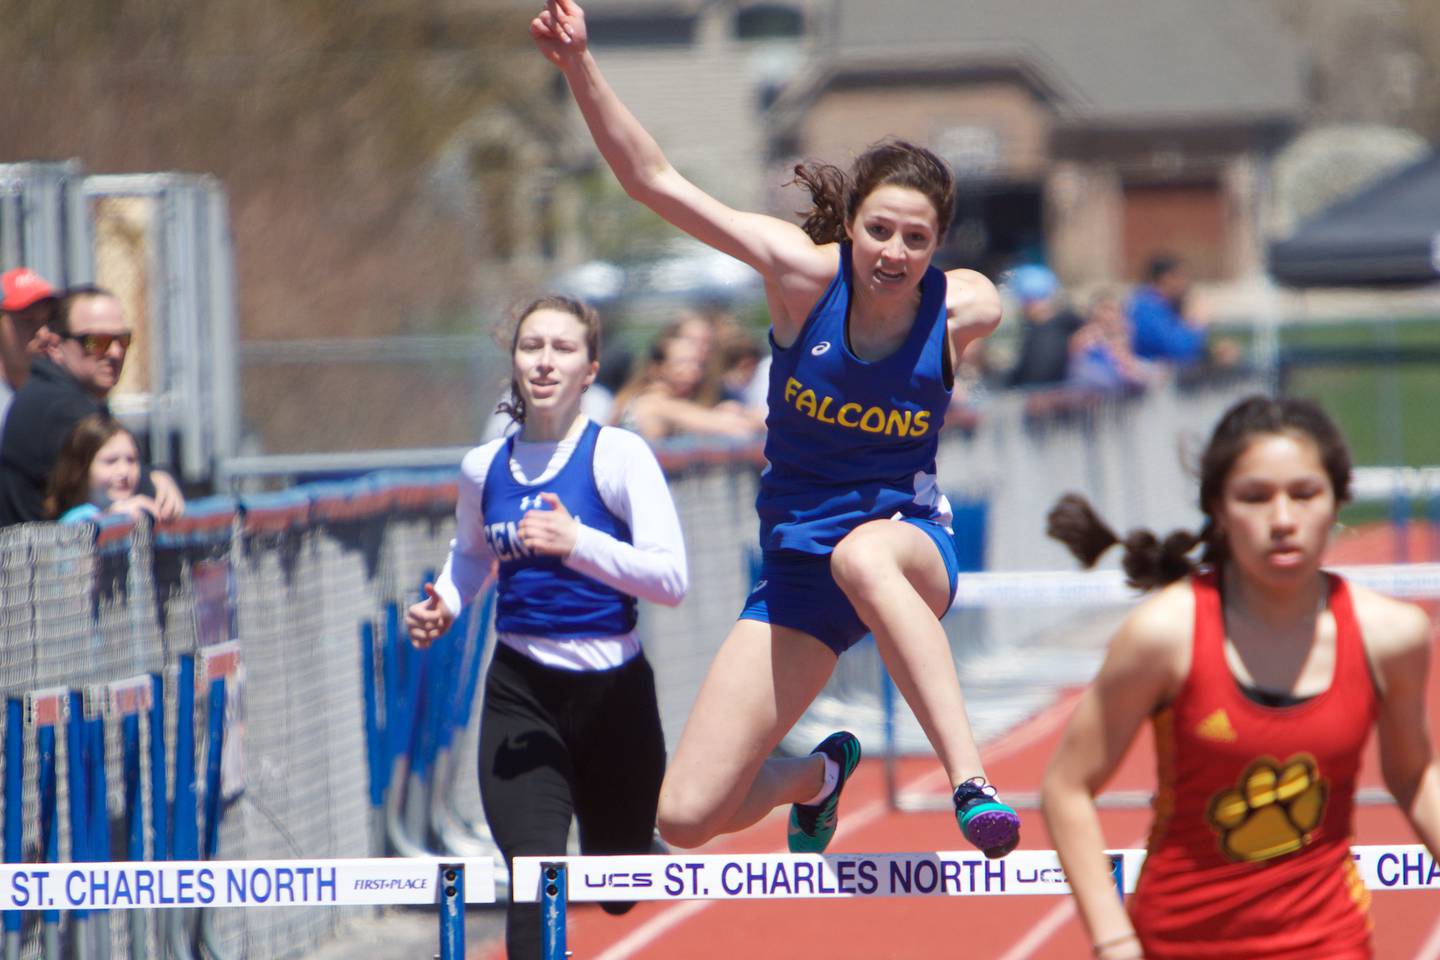 Wheaton North's Grace Gillmar competes in the 300 Meter Hurdles at the DuKane Girl's Conference meet at St. Charles North on May 7, 2022 in St. Charles.